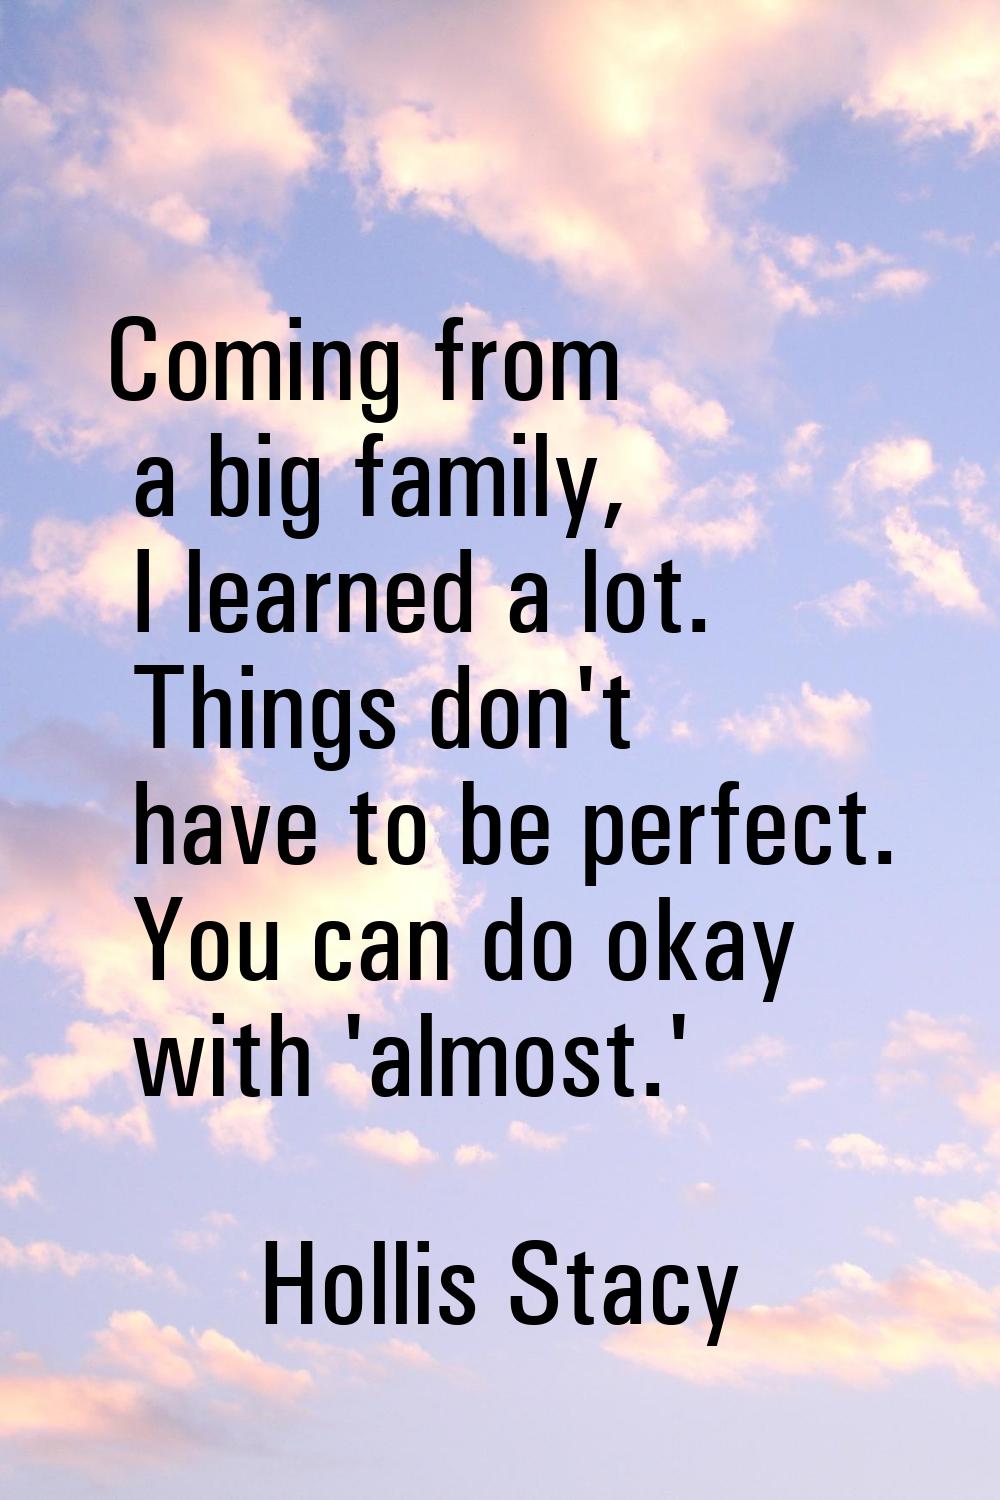 Coming from a big family, I learned a lot. Things don't have to be perfect. You can do okay with 'a